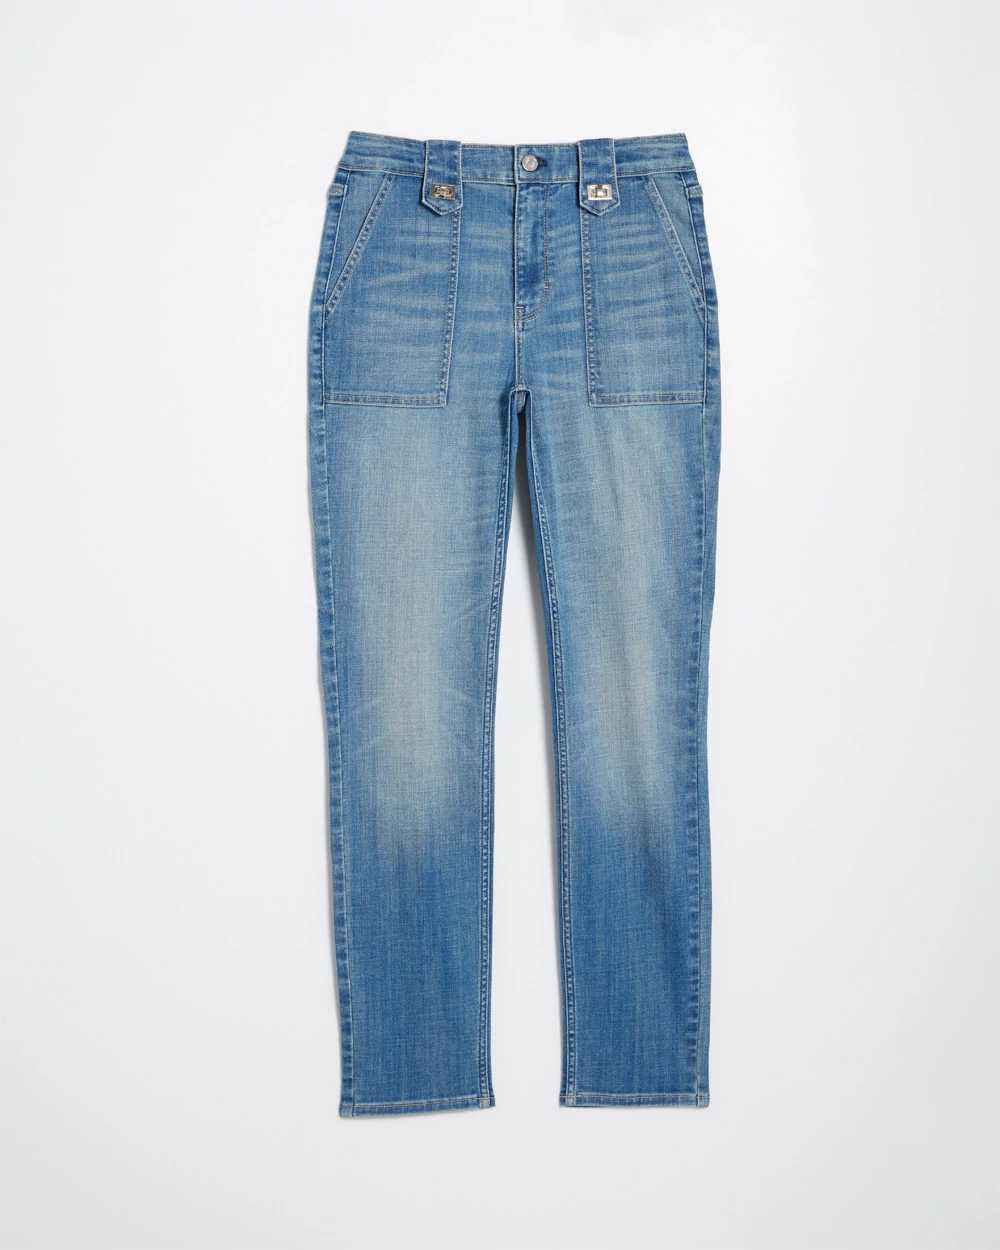 High-Rise Every Day Soft Turnlock Pocket Slim Jeans click to view larger image.